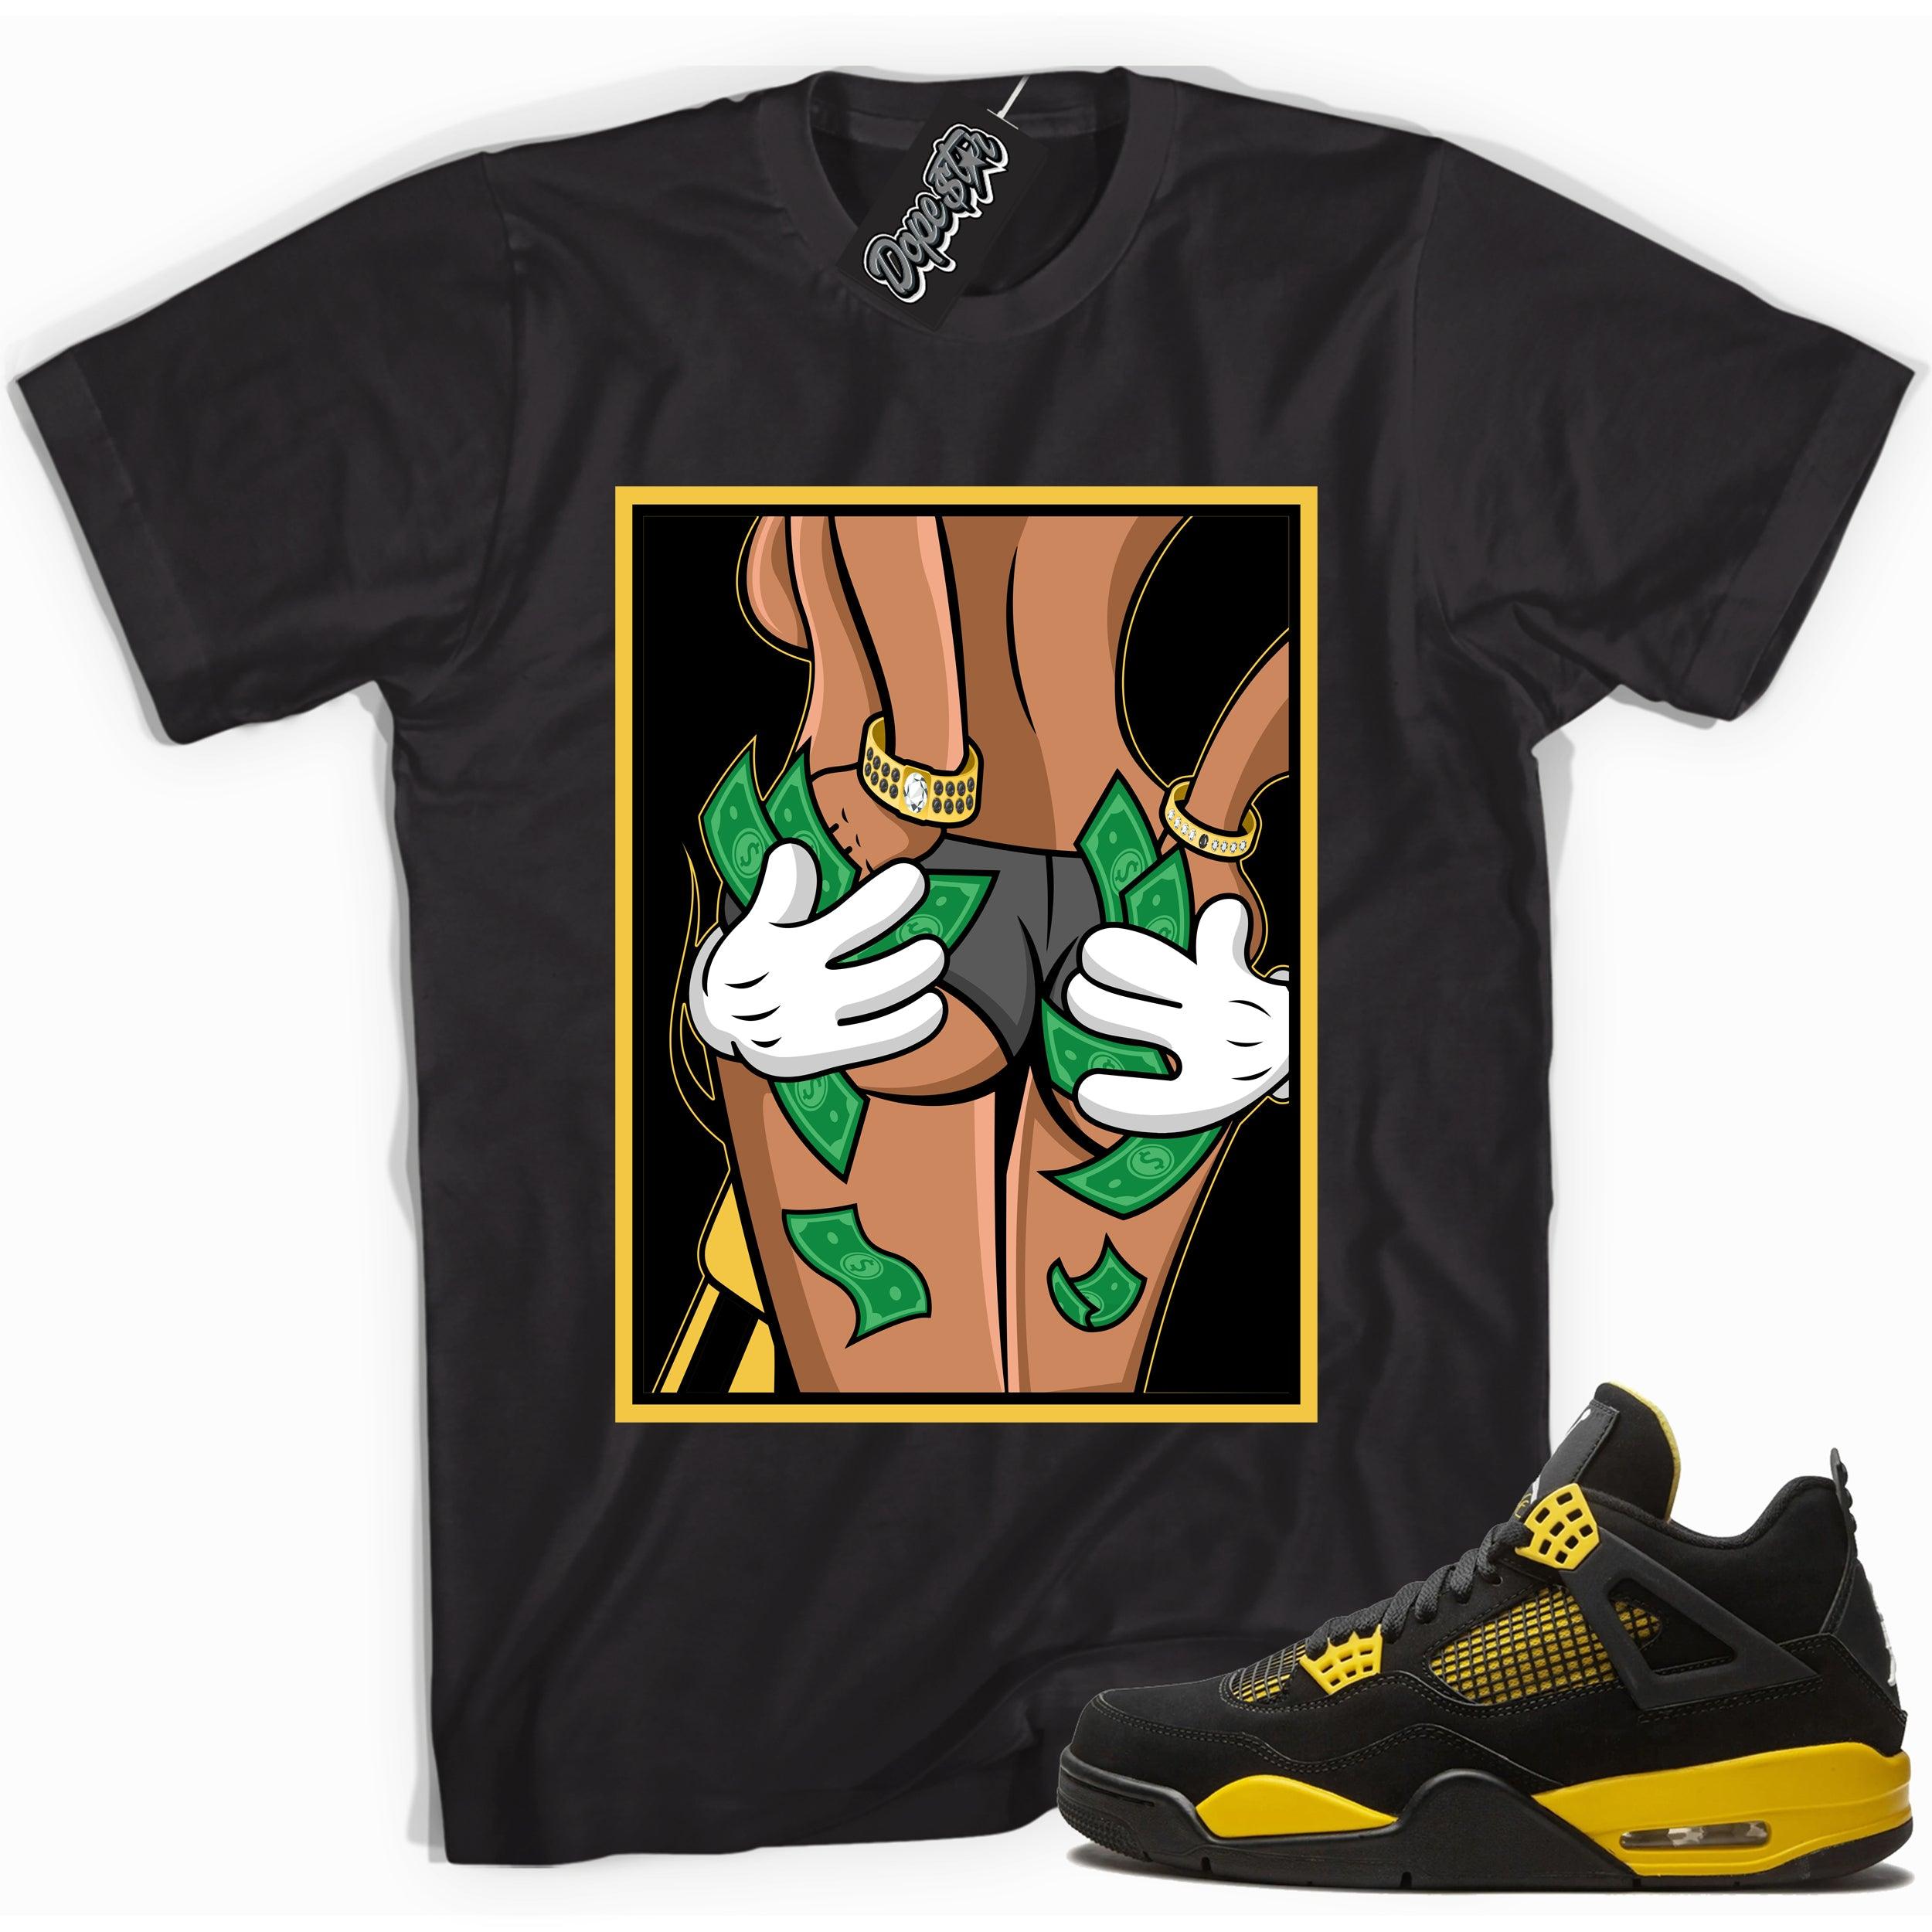 Cool black graphic tee with 'got my hands full money hands' print, that perfectly matches  Air Jordan 4 Thunder sneakers